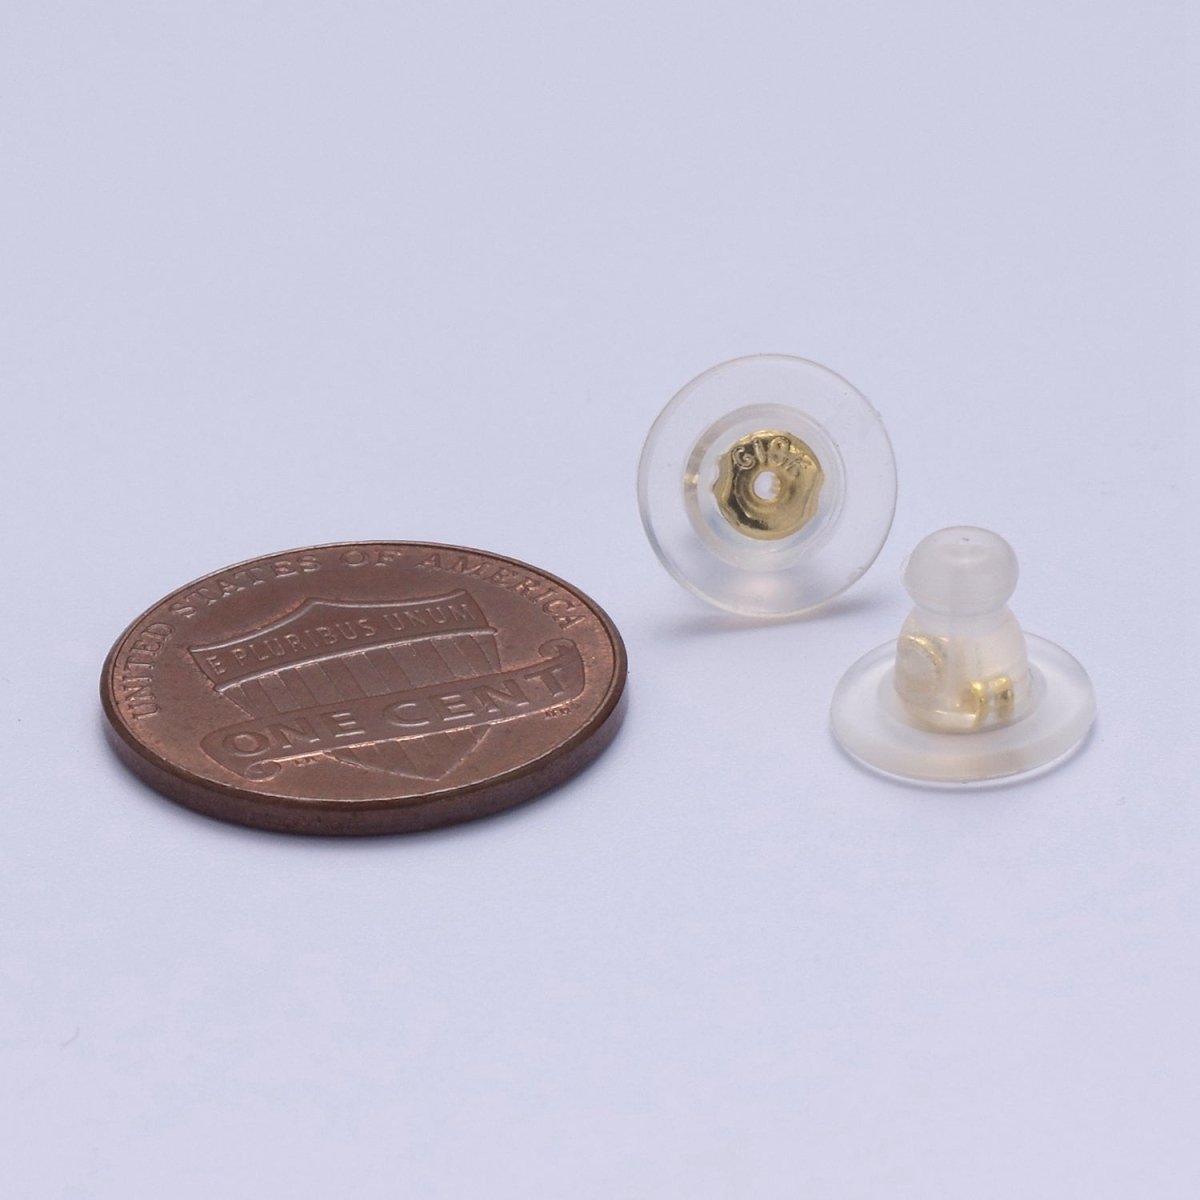 OS Bullet Clutch Earring Backs for Studs with Pad Rubber Earring Stoppers Pierced Safety Backs K-231 - DLUXCA